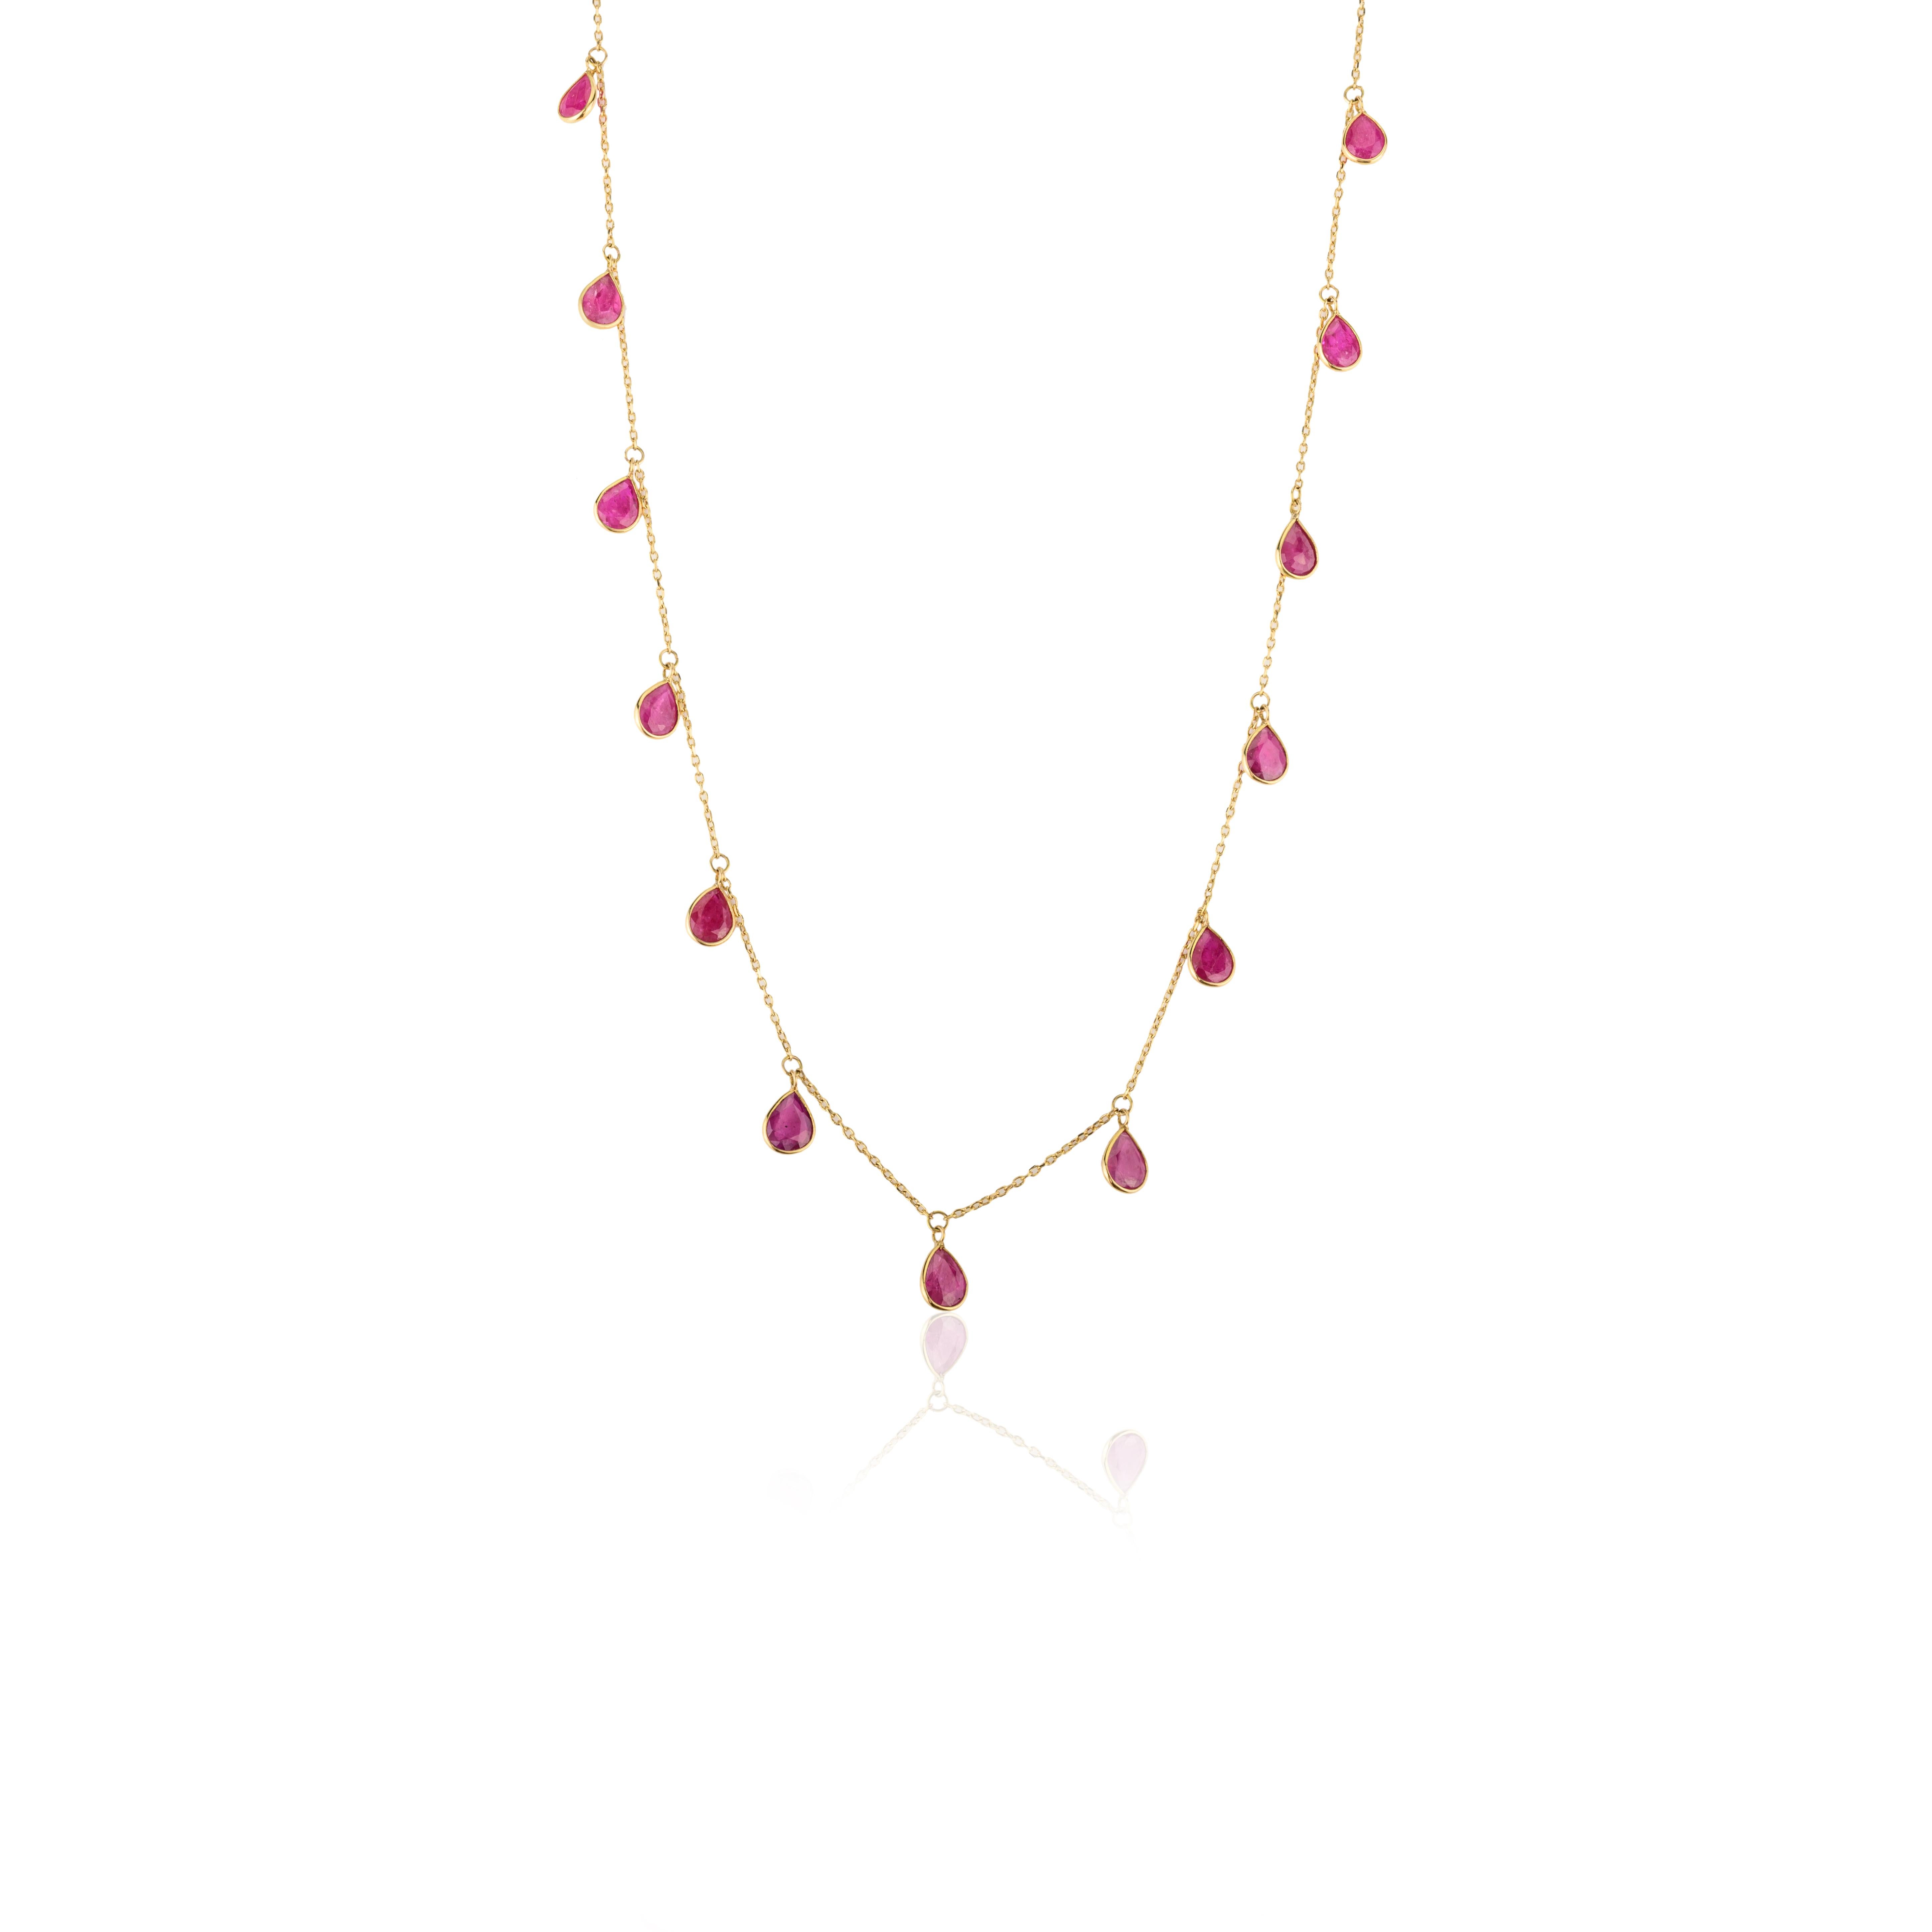 Contemporary Pear Bezel Set Ruby Fringe Necklace in 18 Karat Yellow Gold Gift for Women For Sale